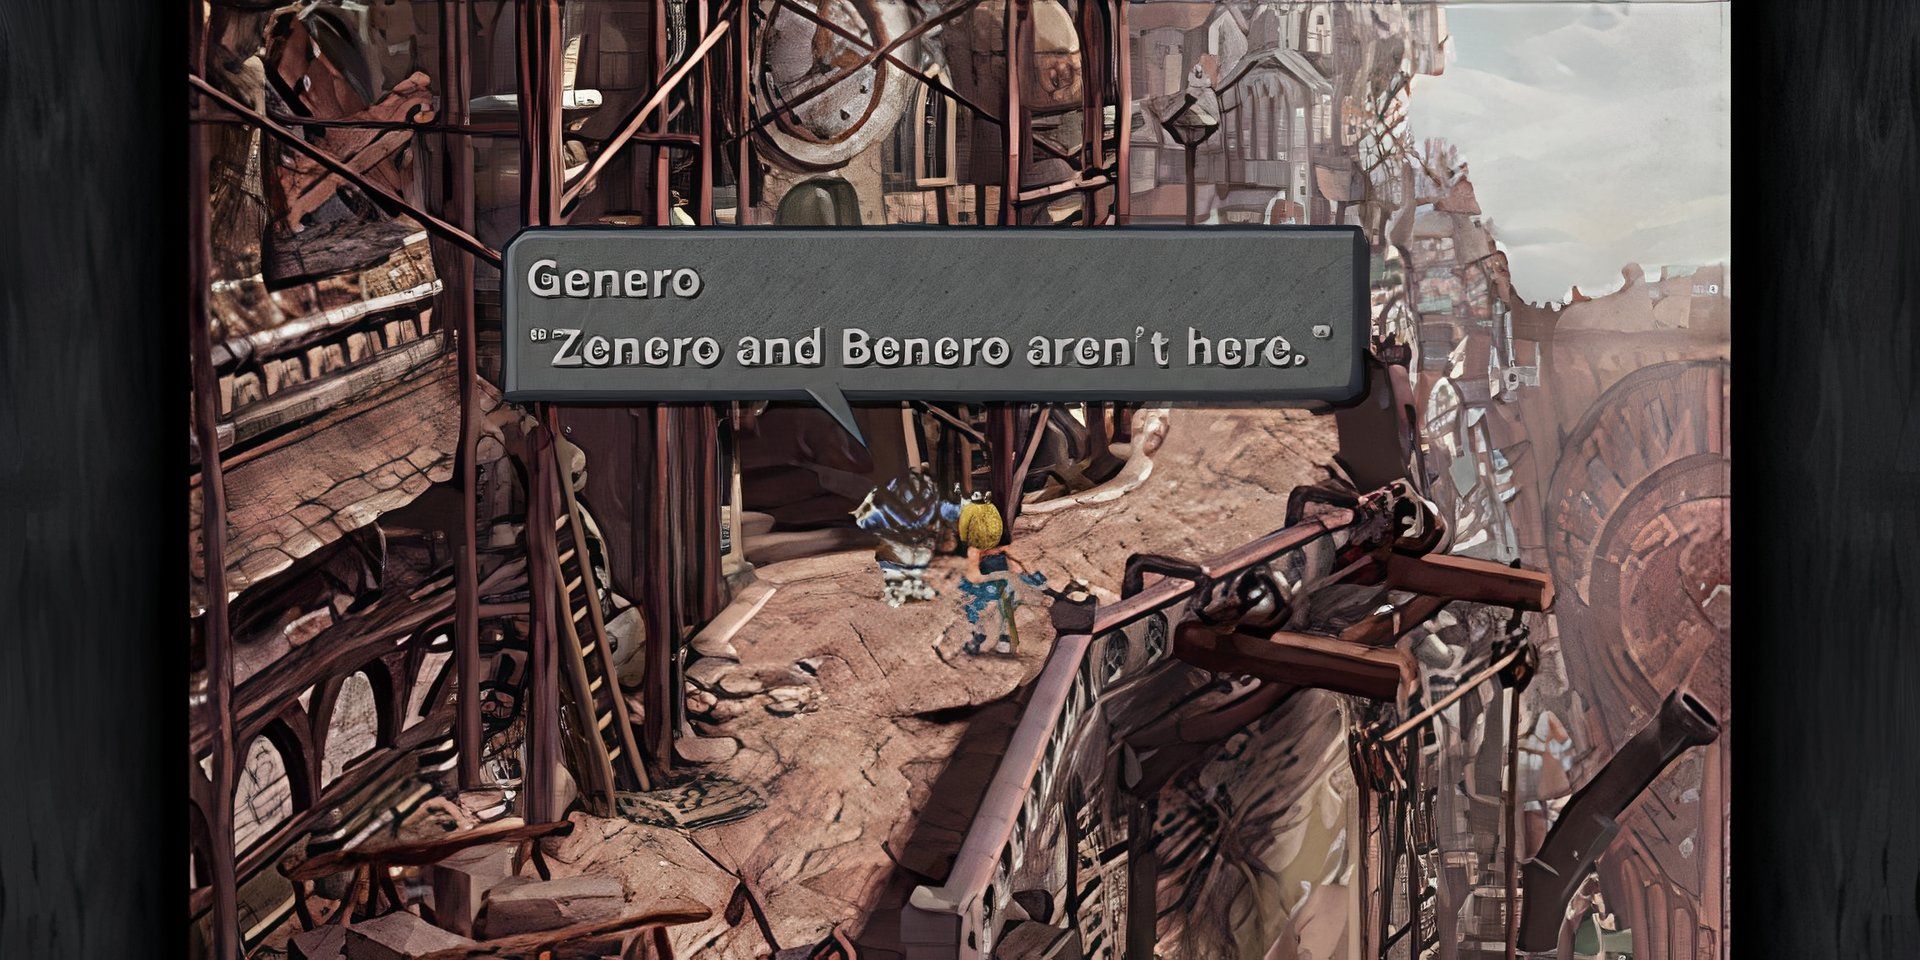 The Nero family sidequest in Final Fantasy 9